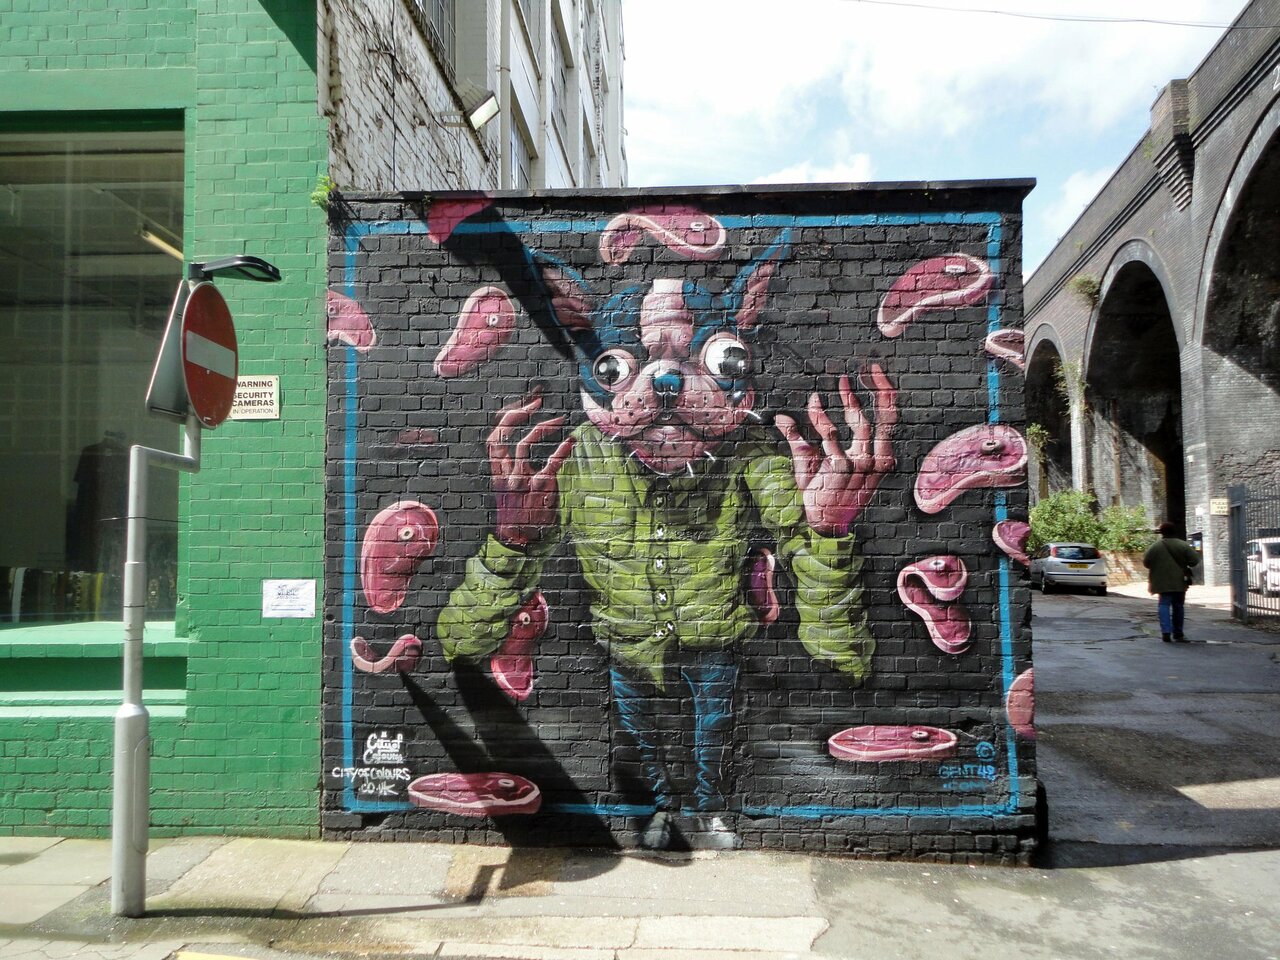 RT @djcolatron: An oldie promo for City of Colours, by Gent 48

#art #arte #mural #graffiti #streetart #Digbeth http://t.co/RD27uJyvIQ